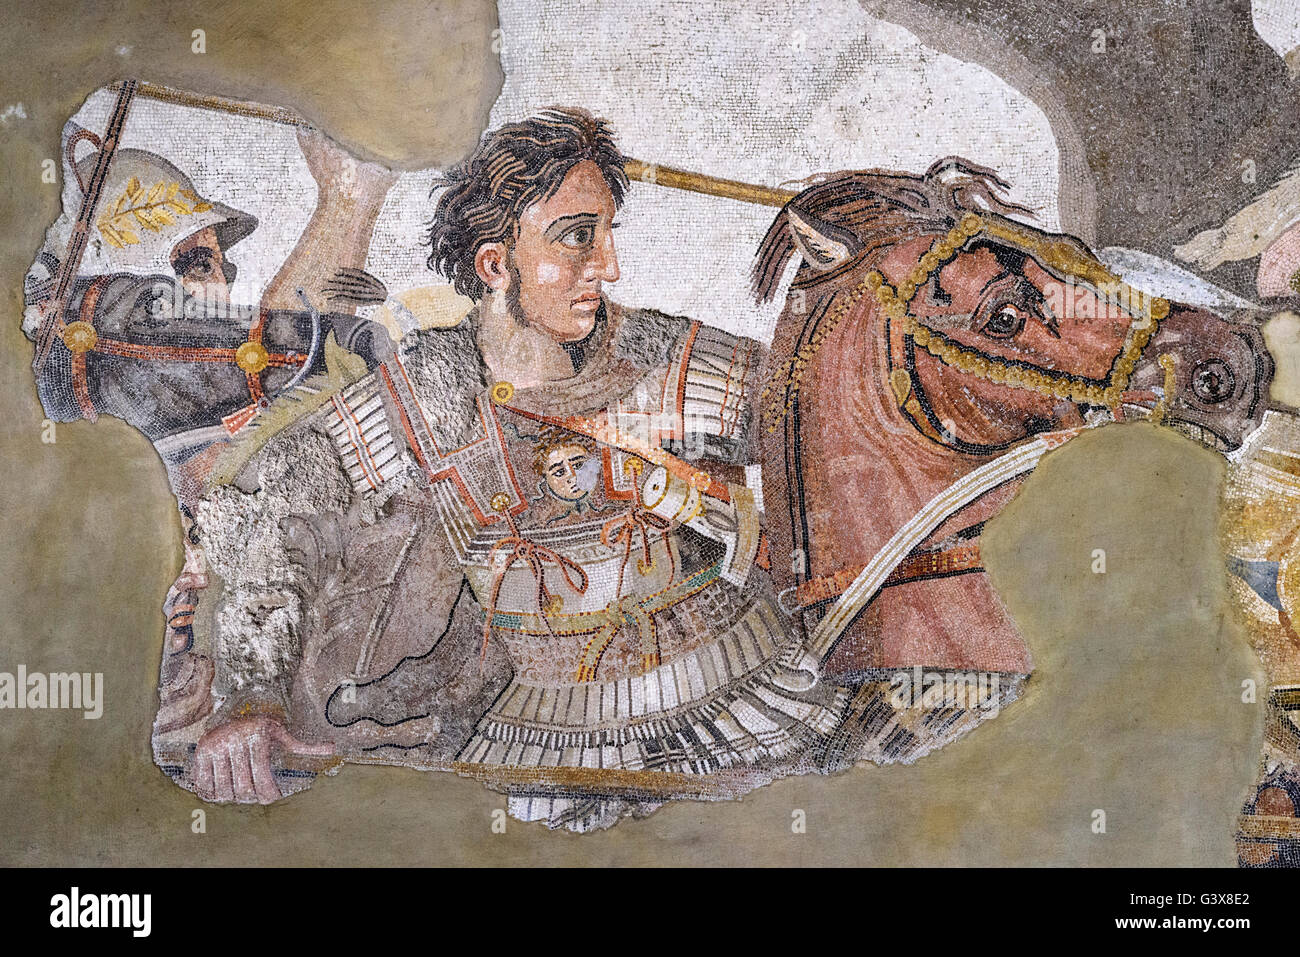 Naples. Italy. Alexander Mosaic (ca. 120 BC), detail of Alexander the Great on horseback. Museo Archeologico nazionale di Napoli Stock Photo